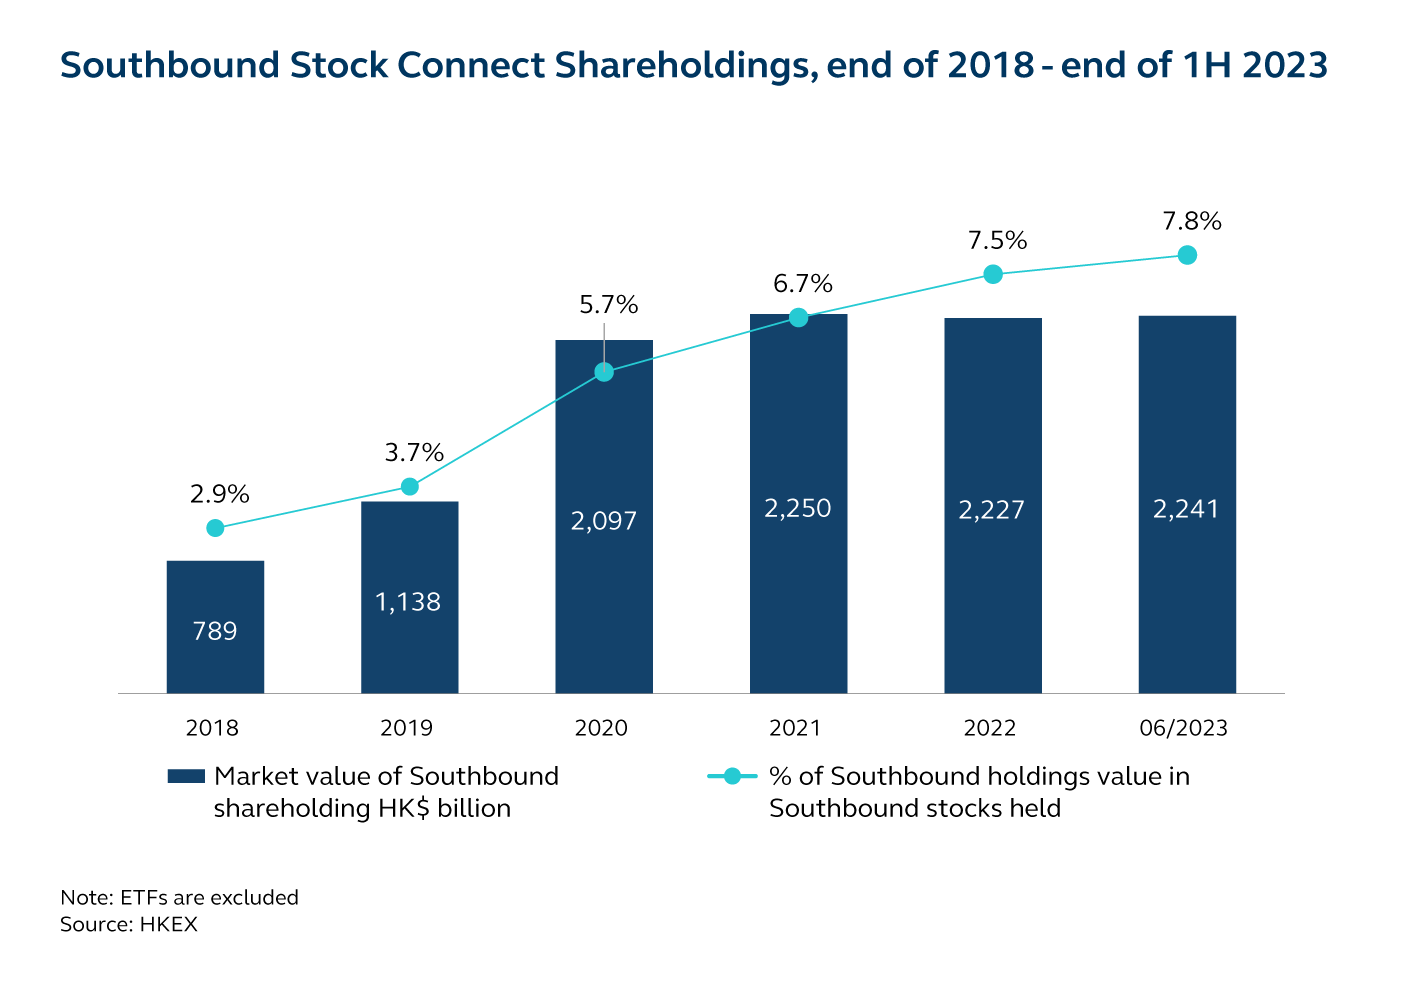 The total capitalisation of shares held by investors via Southbound Stock Connect between 2018 and 1H 2023, based on HKEX data. 